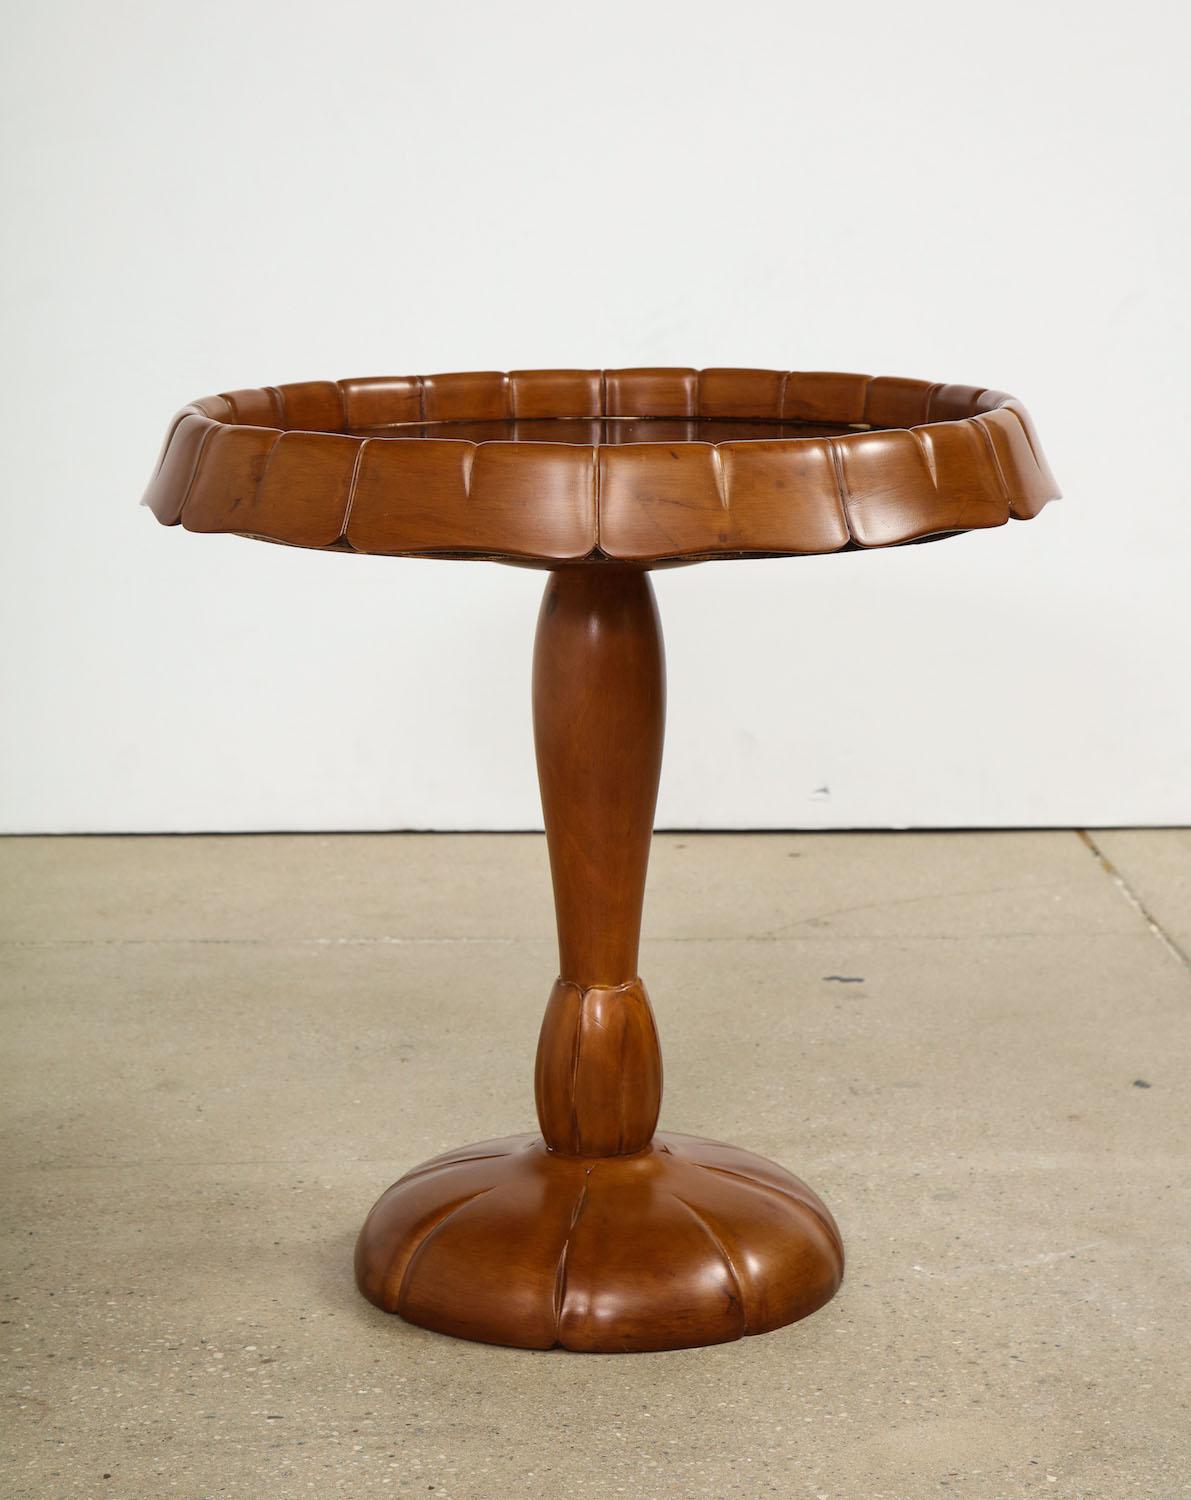 Carved pedestal table attributed to Osvaldo Borsani. Pedestal table of carved wood with relief details. Inset mirrored top.
  